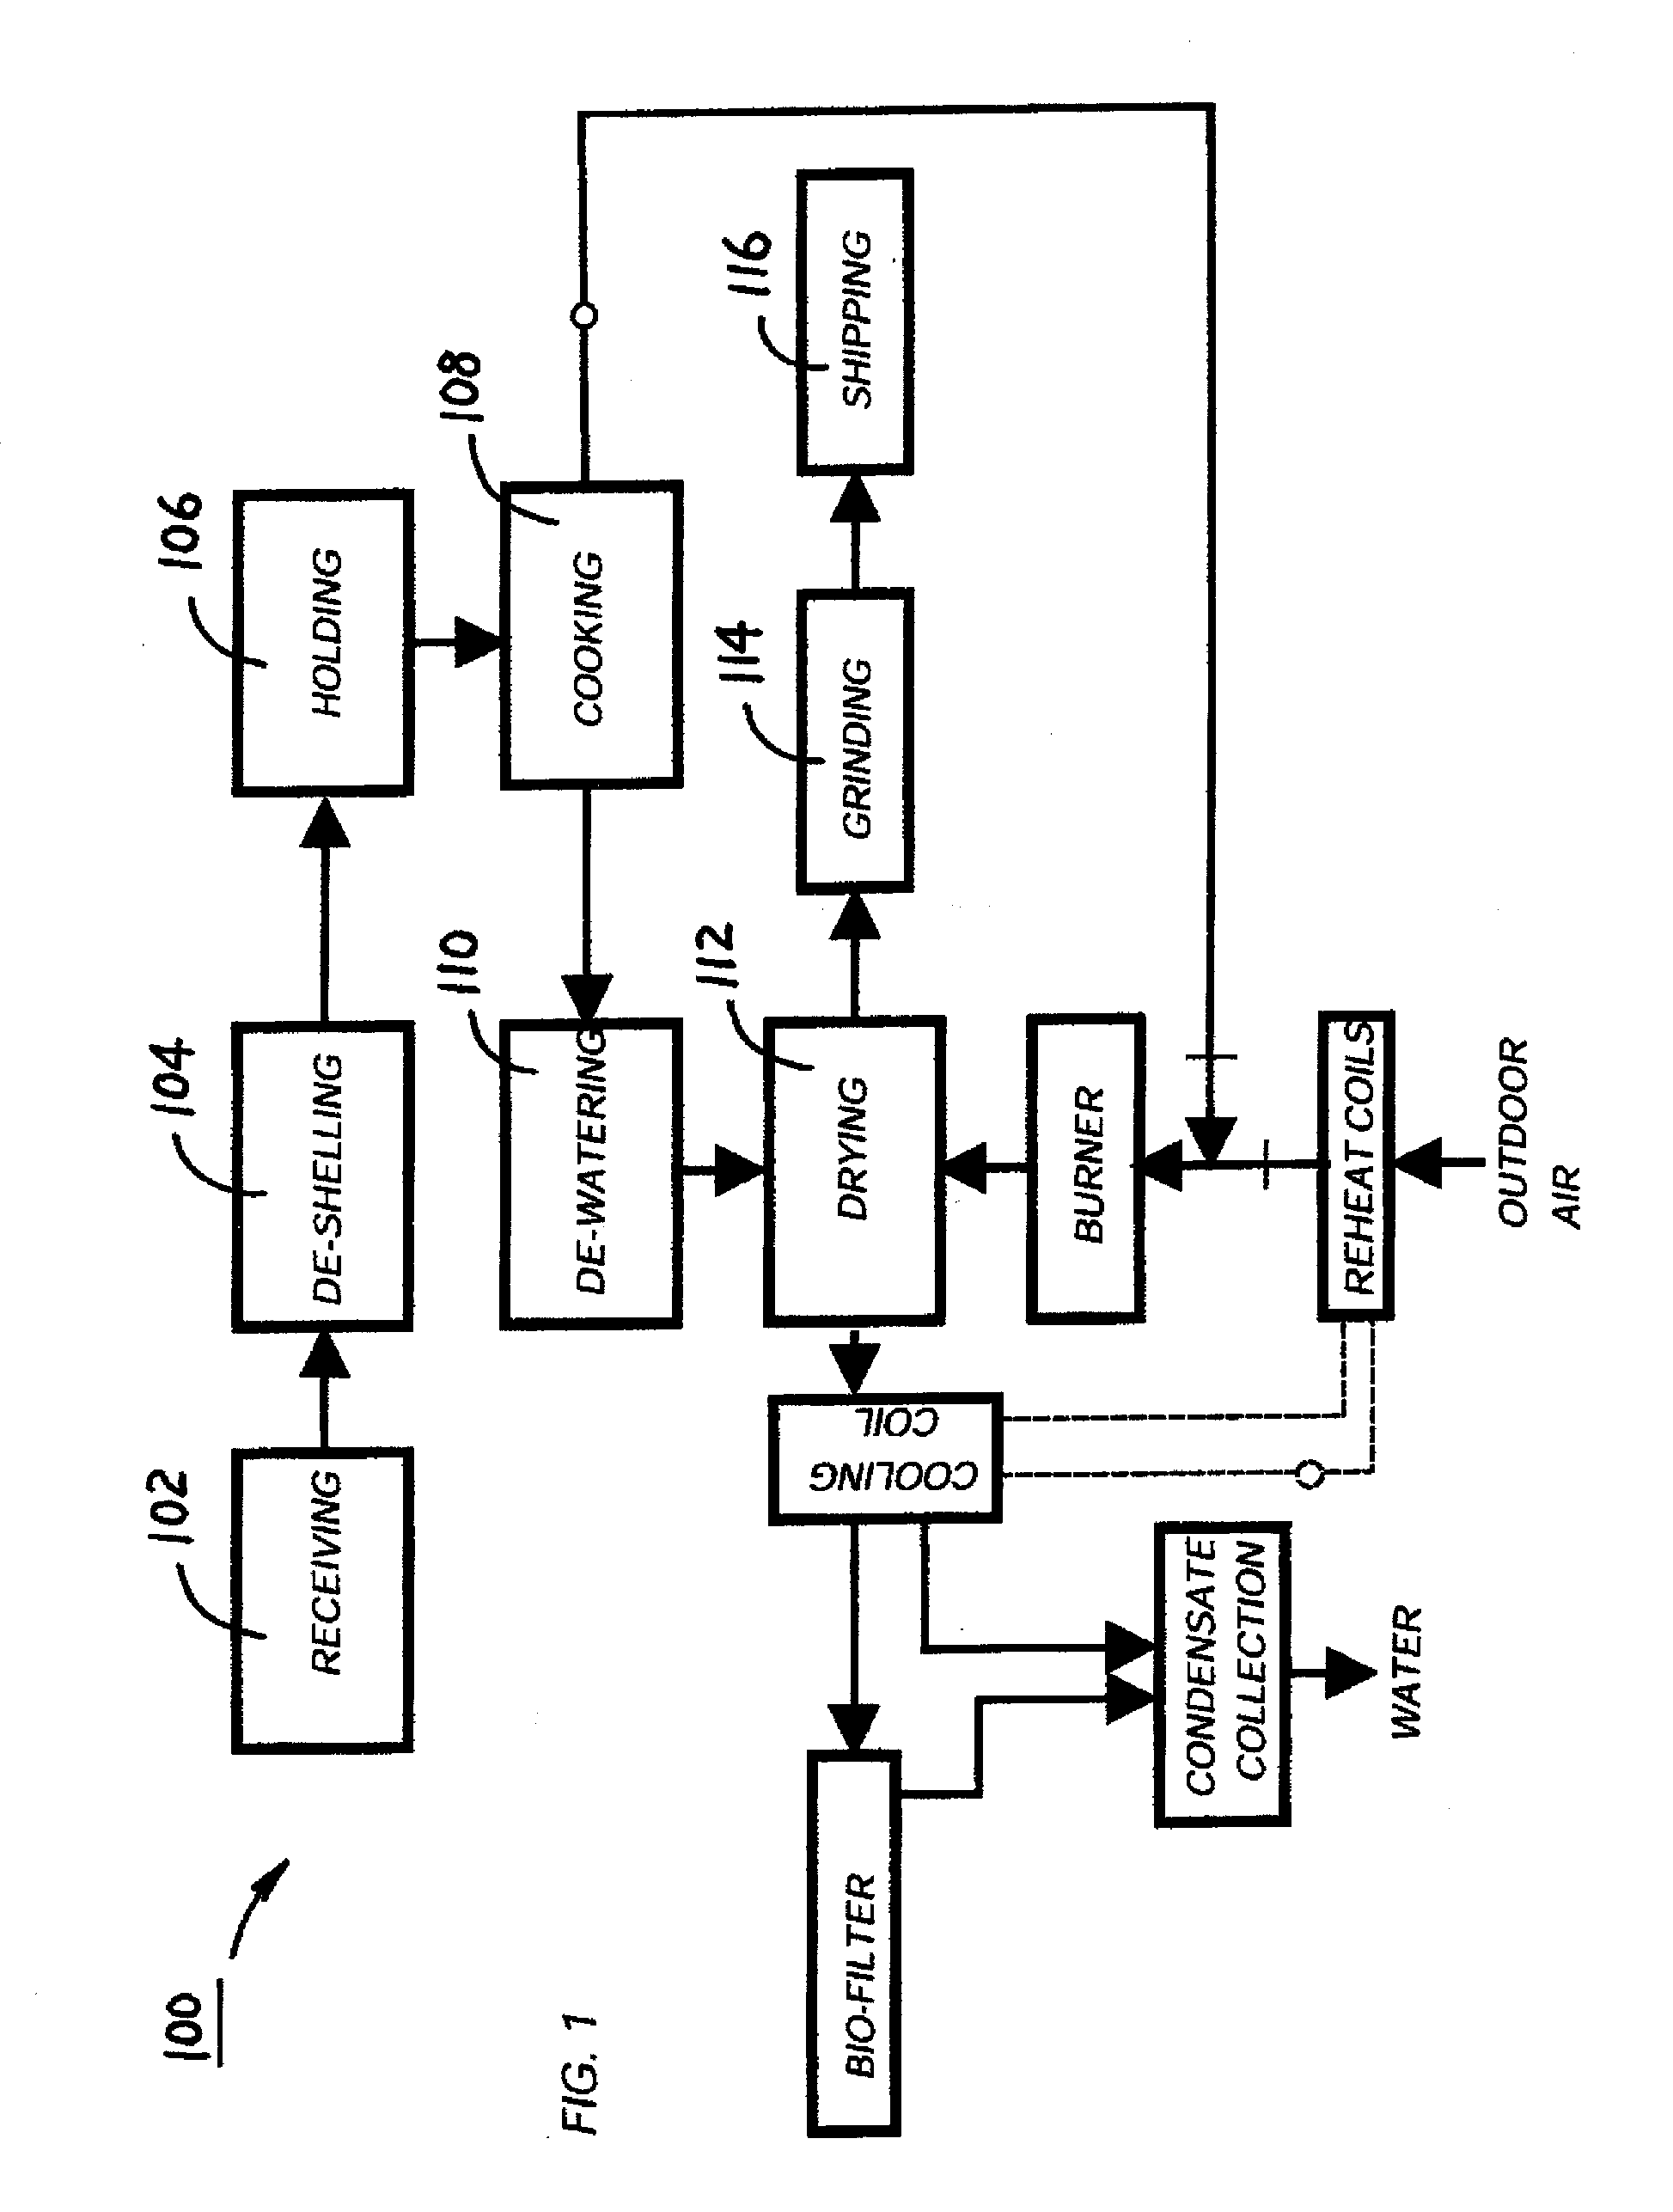 Method and apparatus for producing dried whole egg